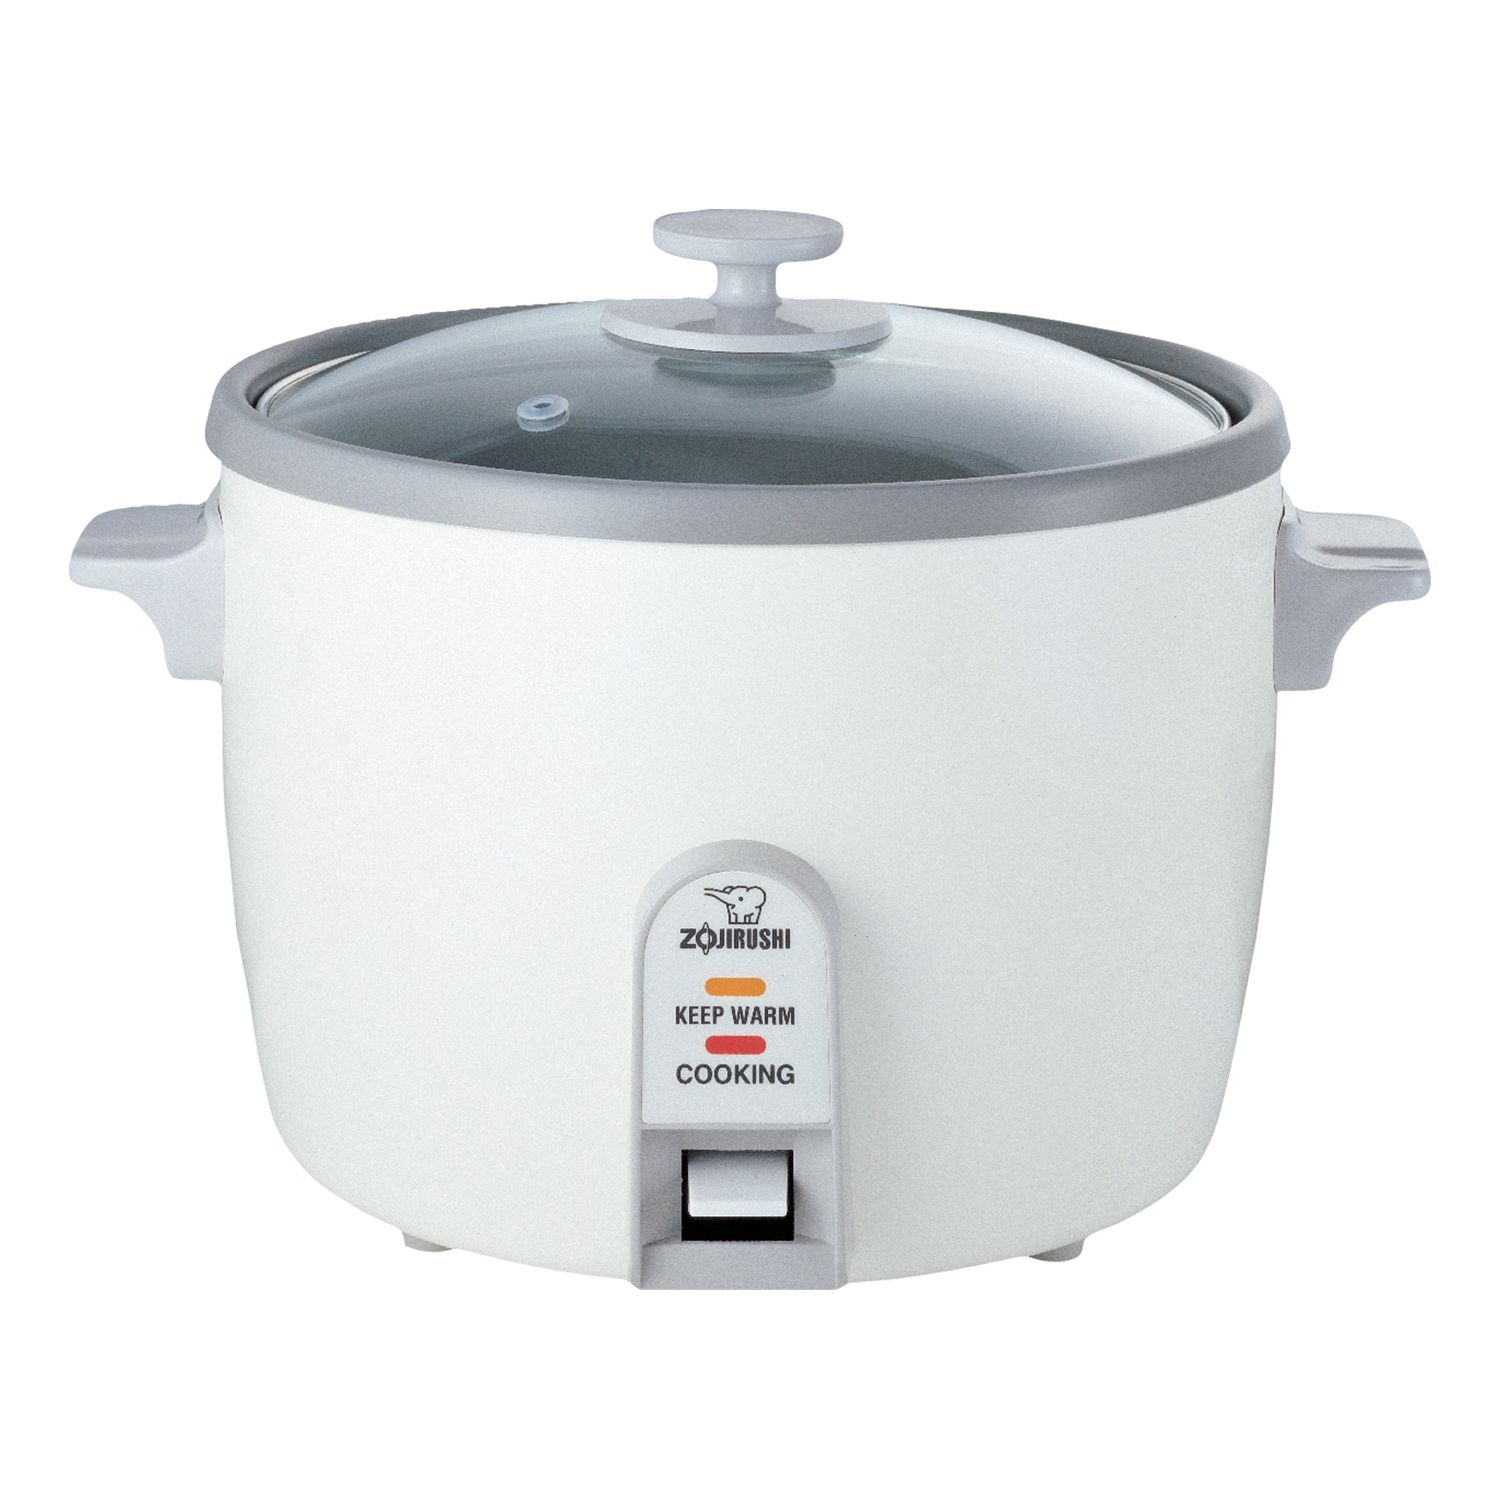 Proctor Silex Durable 10-Cup Rice Cooker